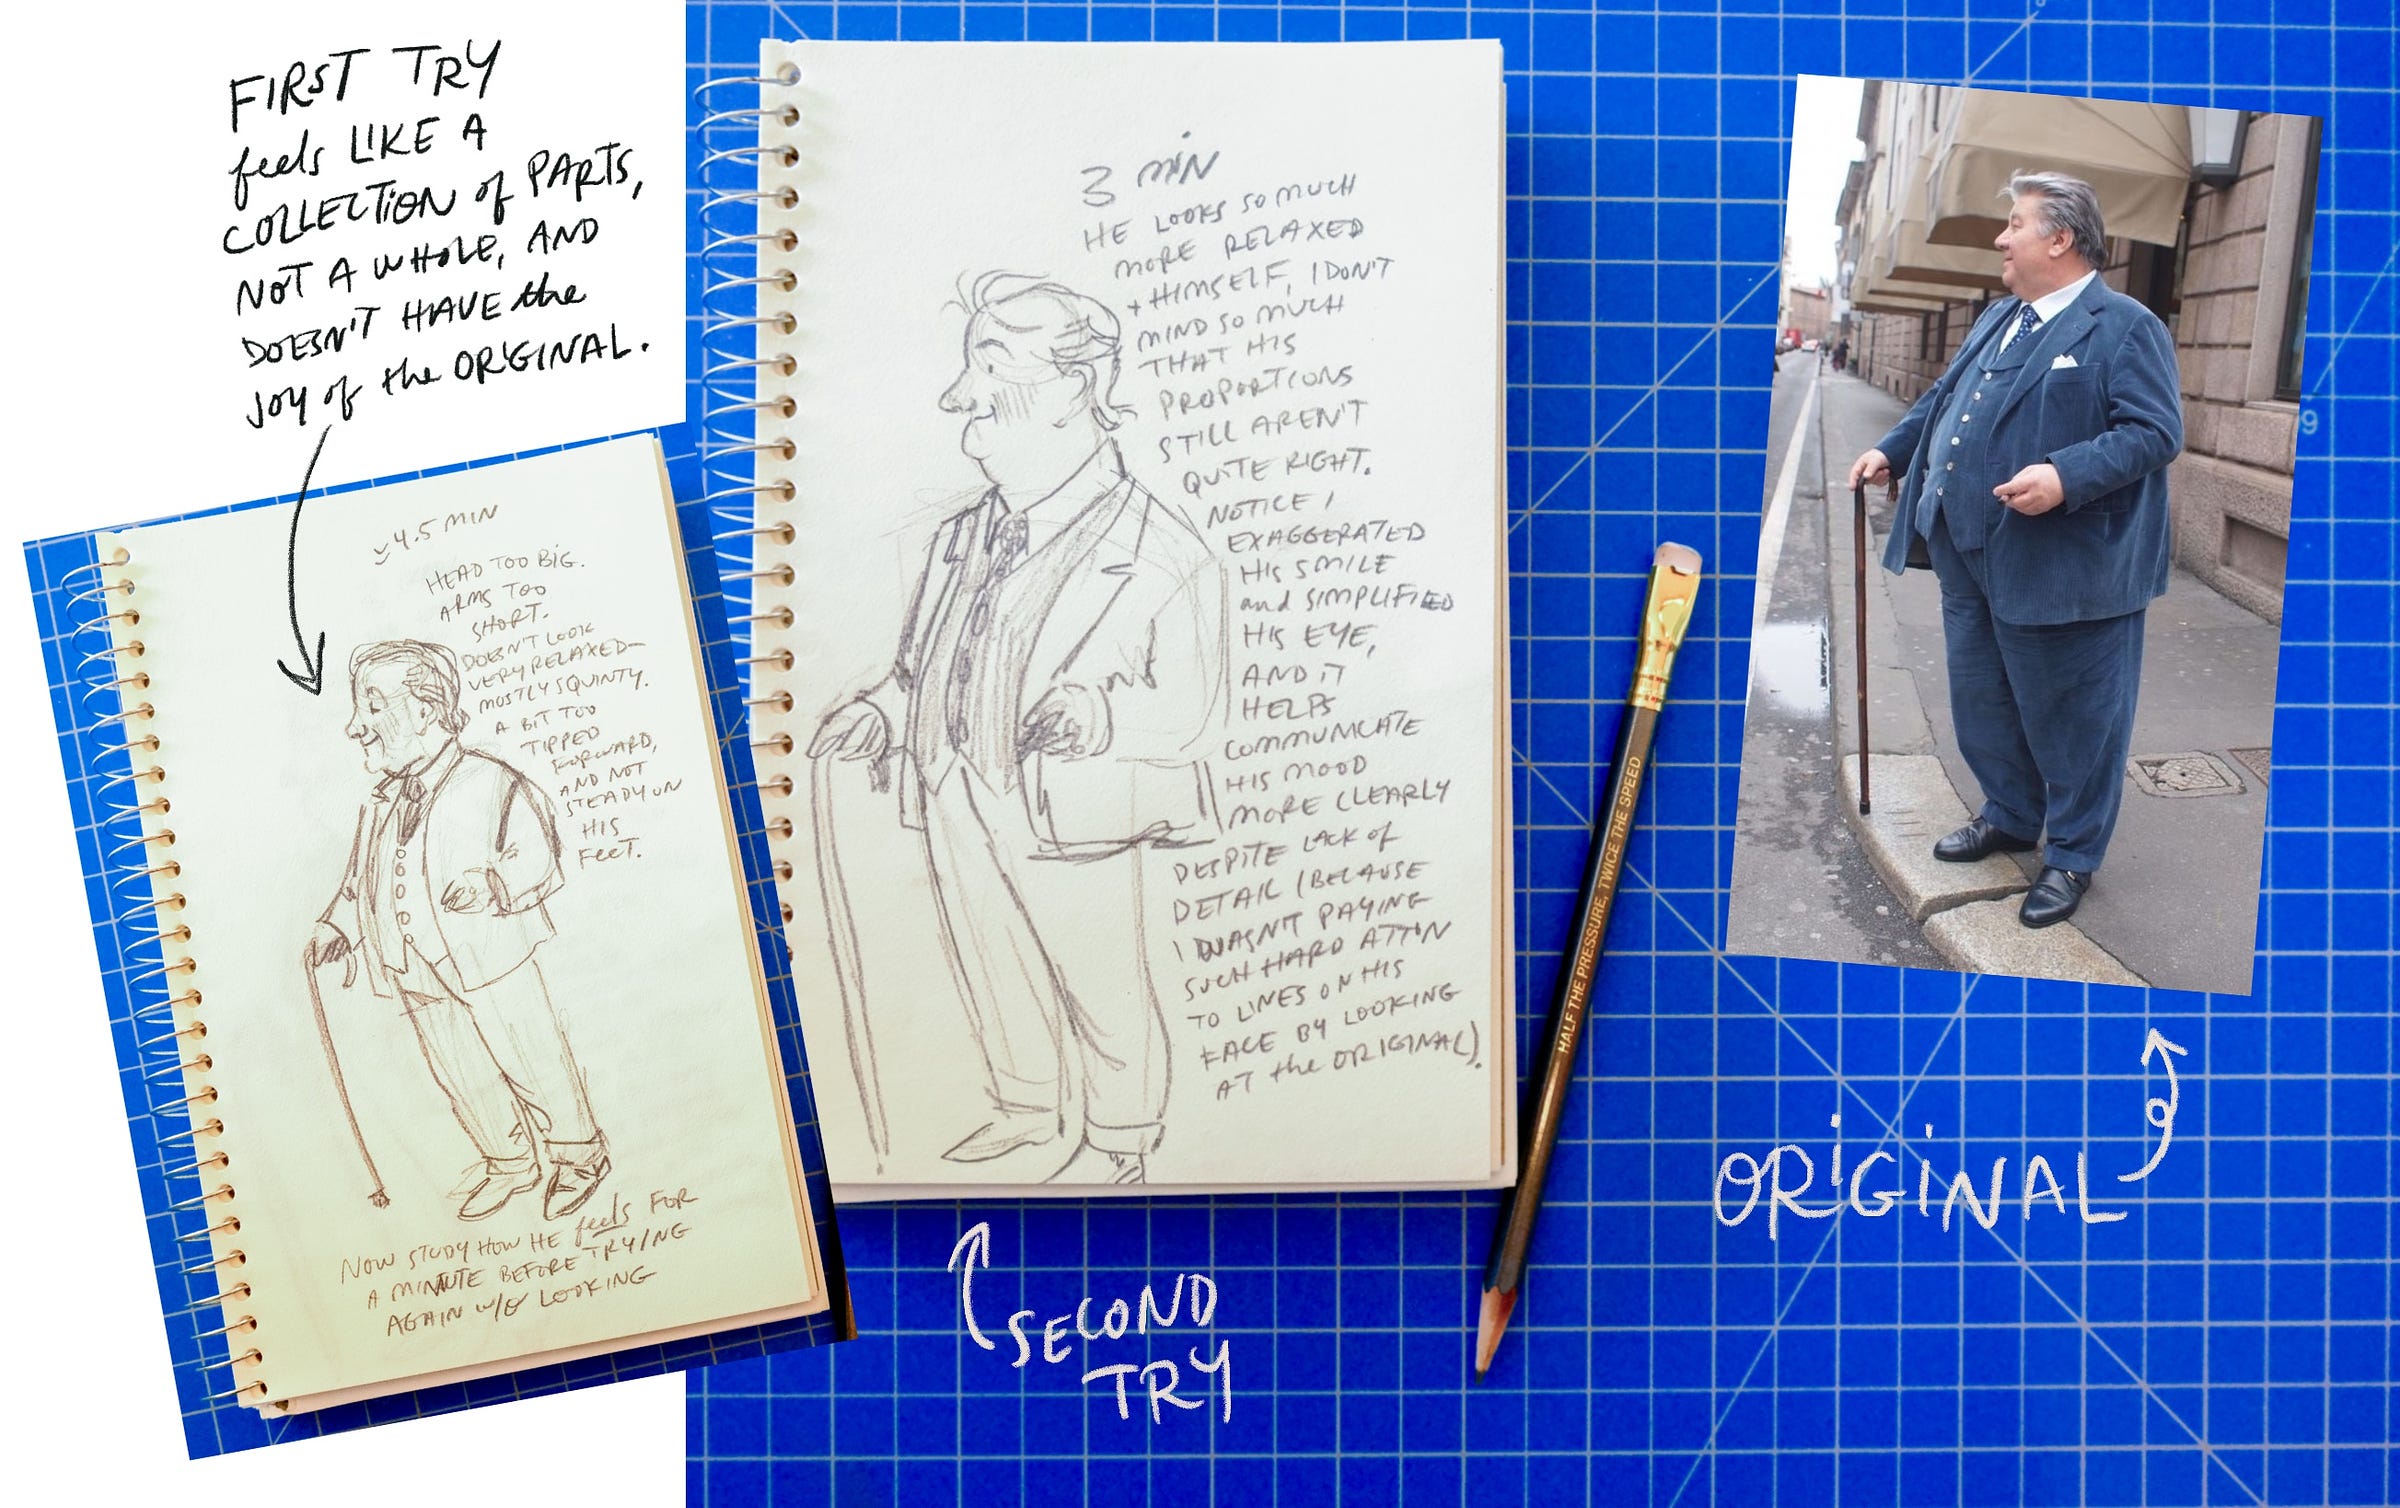 Gracie's sketchbook showing two versions of a drawing of a gentleman in a suit.